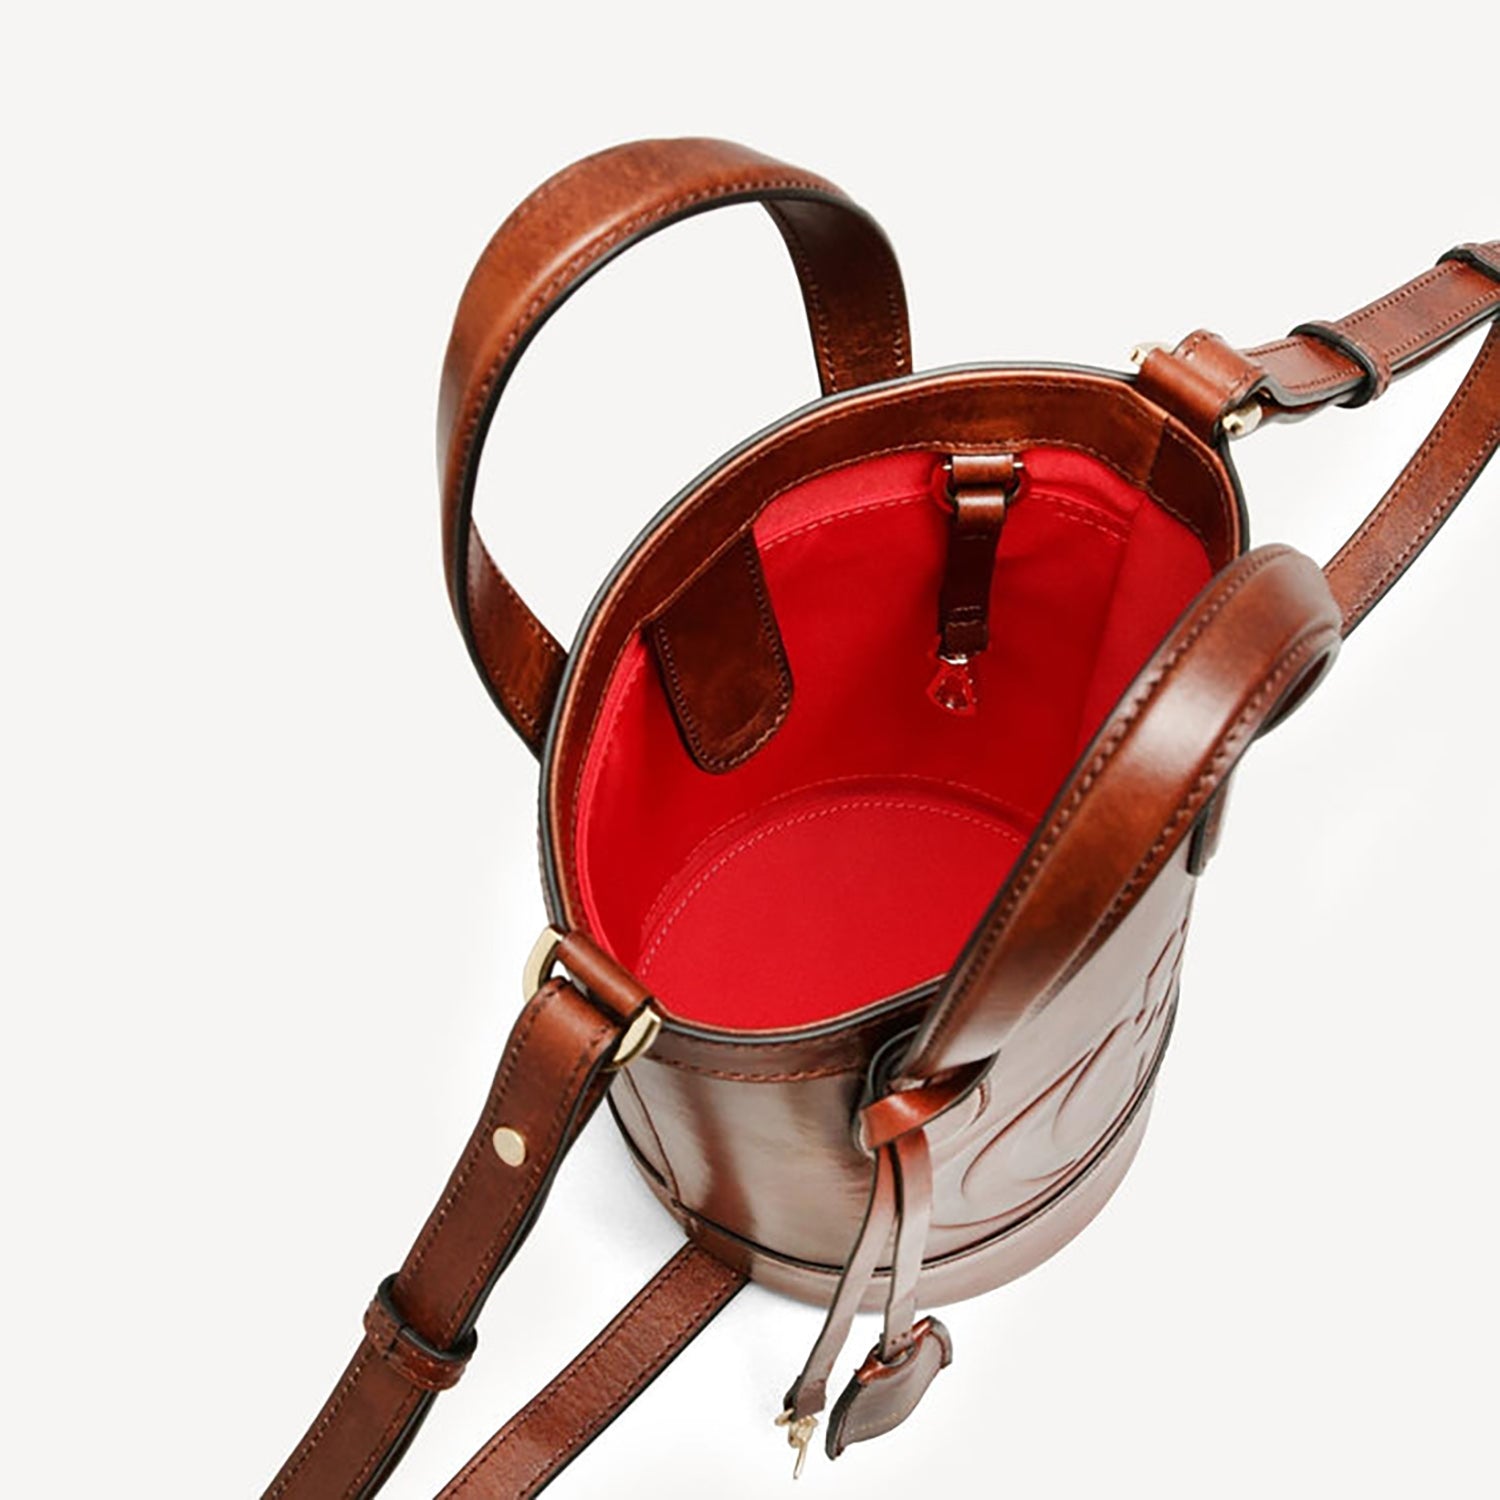 Forever Alice Bucket Bag - Cognac Hand Finished Luxury Leather-Cecily Clune